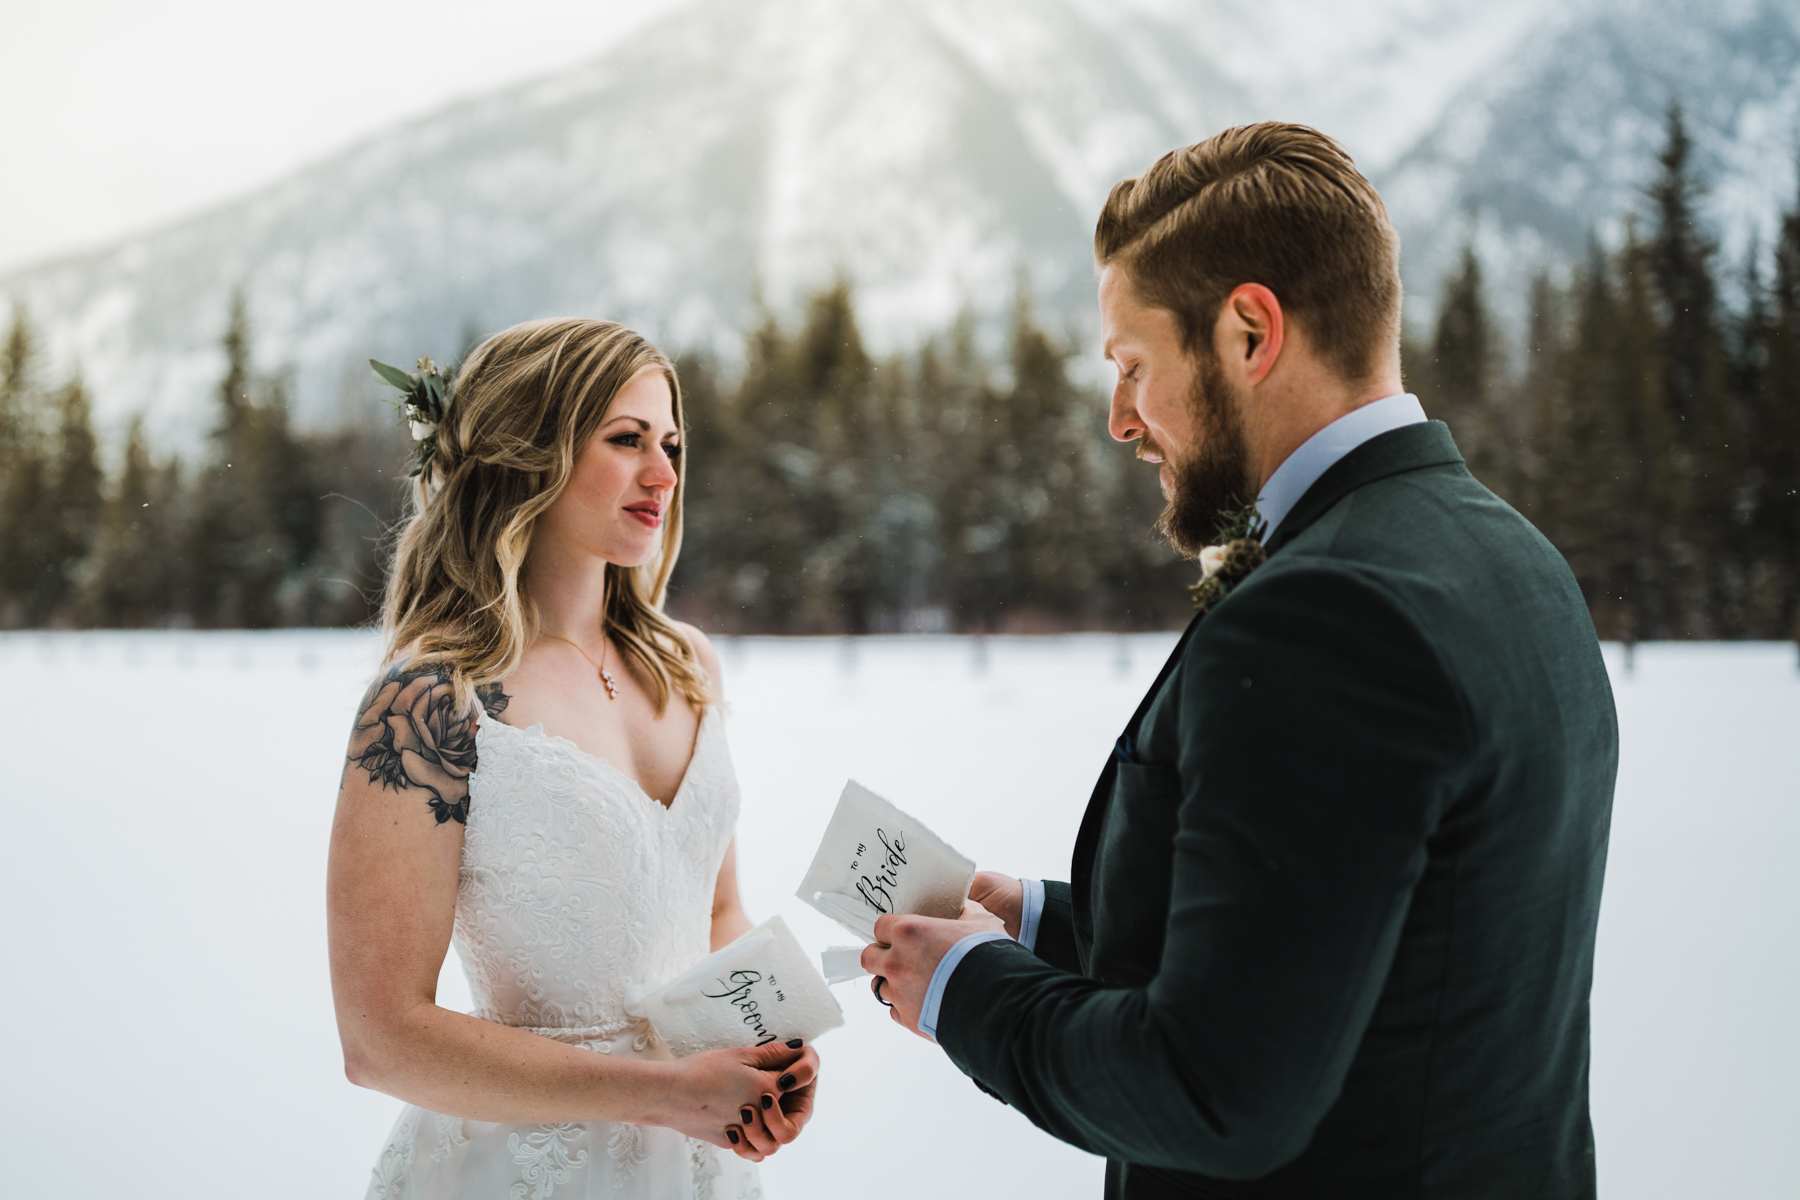 Canmore Elopement Photographer in the Canadian Rockies - Image 22